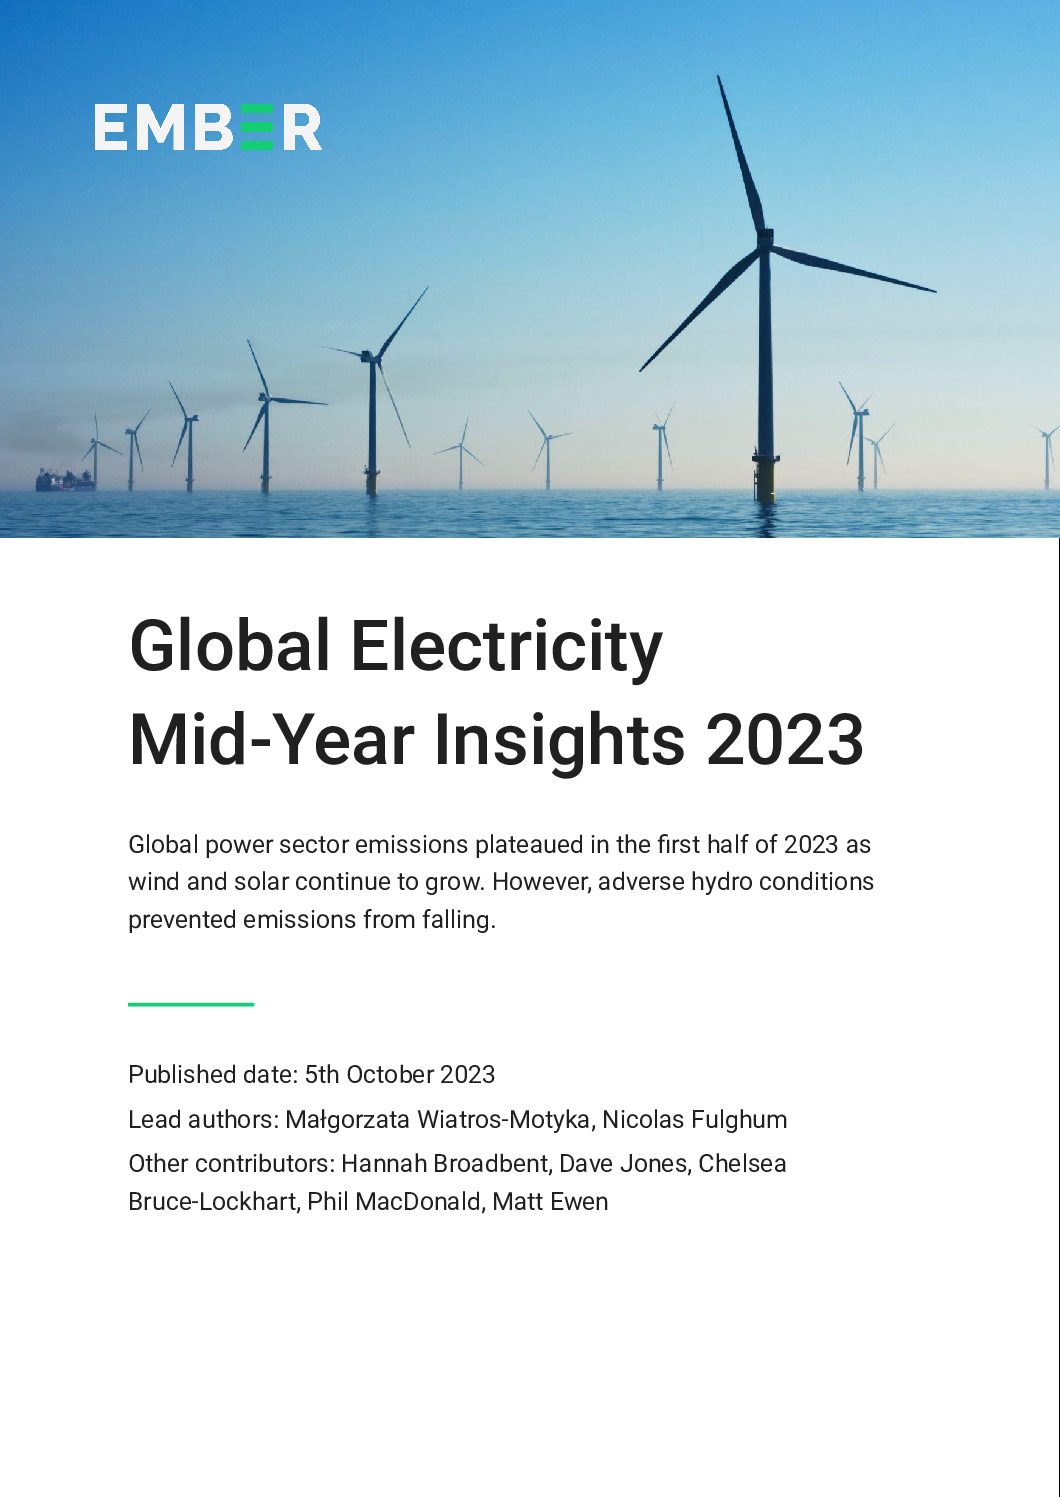 Global Electricity Mid-Year Insights 2023